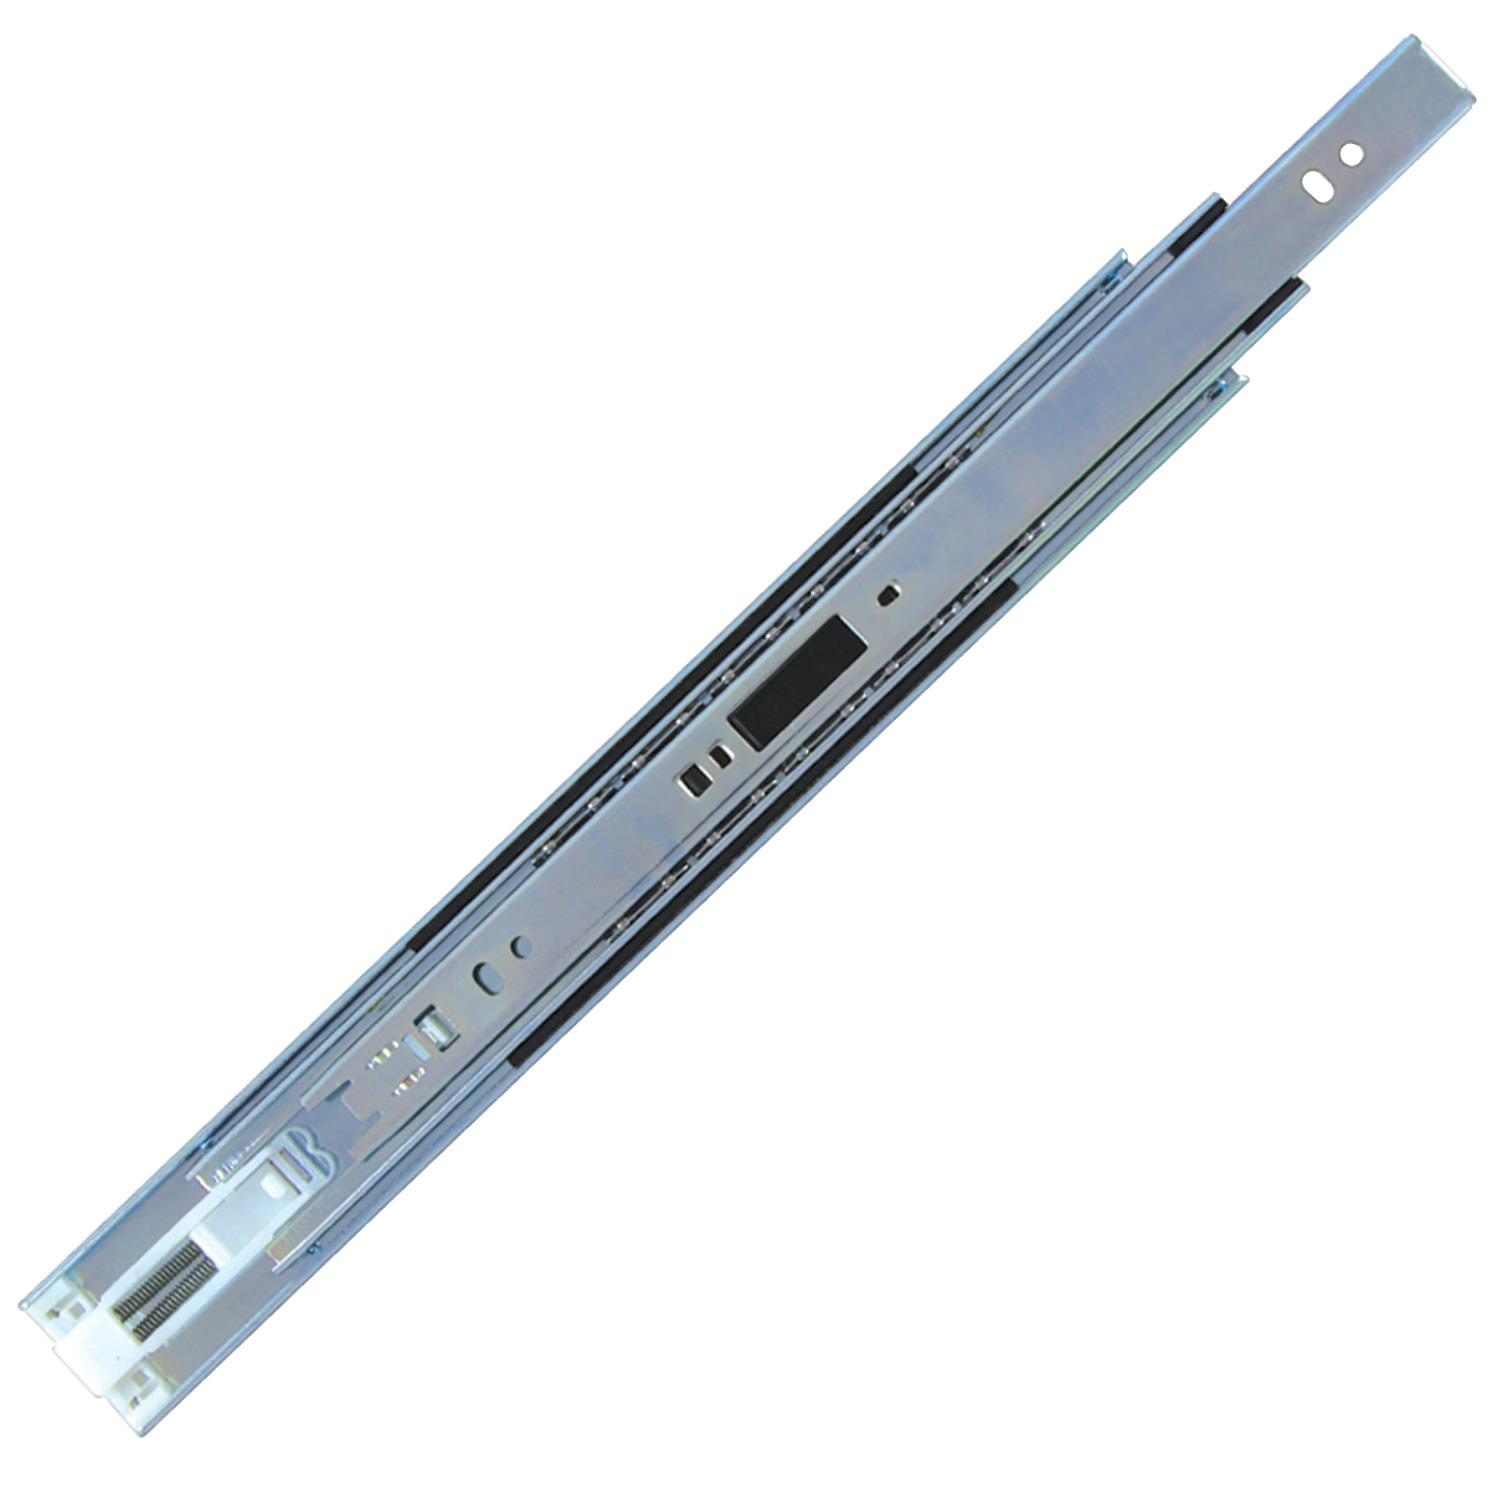 P4050.AC0200 Drawer Slide Full Extn Length 200; Load 30kg per pair. Sold Individually. Lever Disconnect; Soft Close